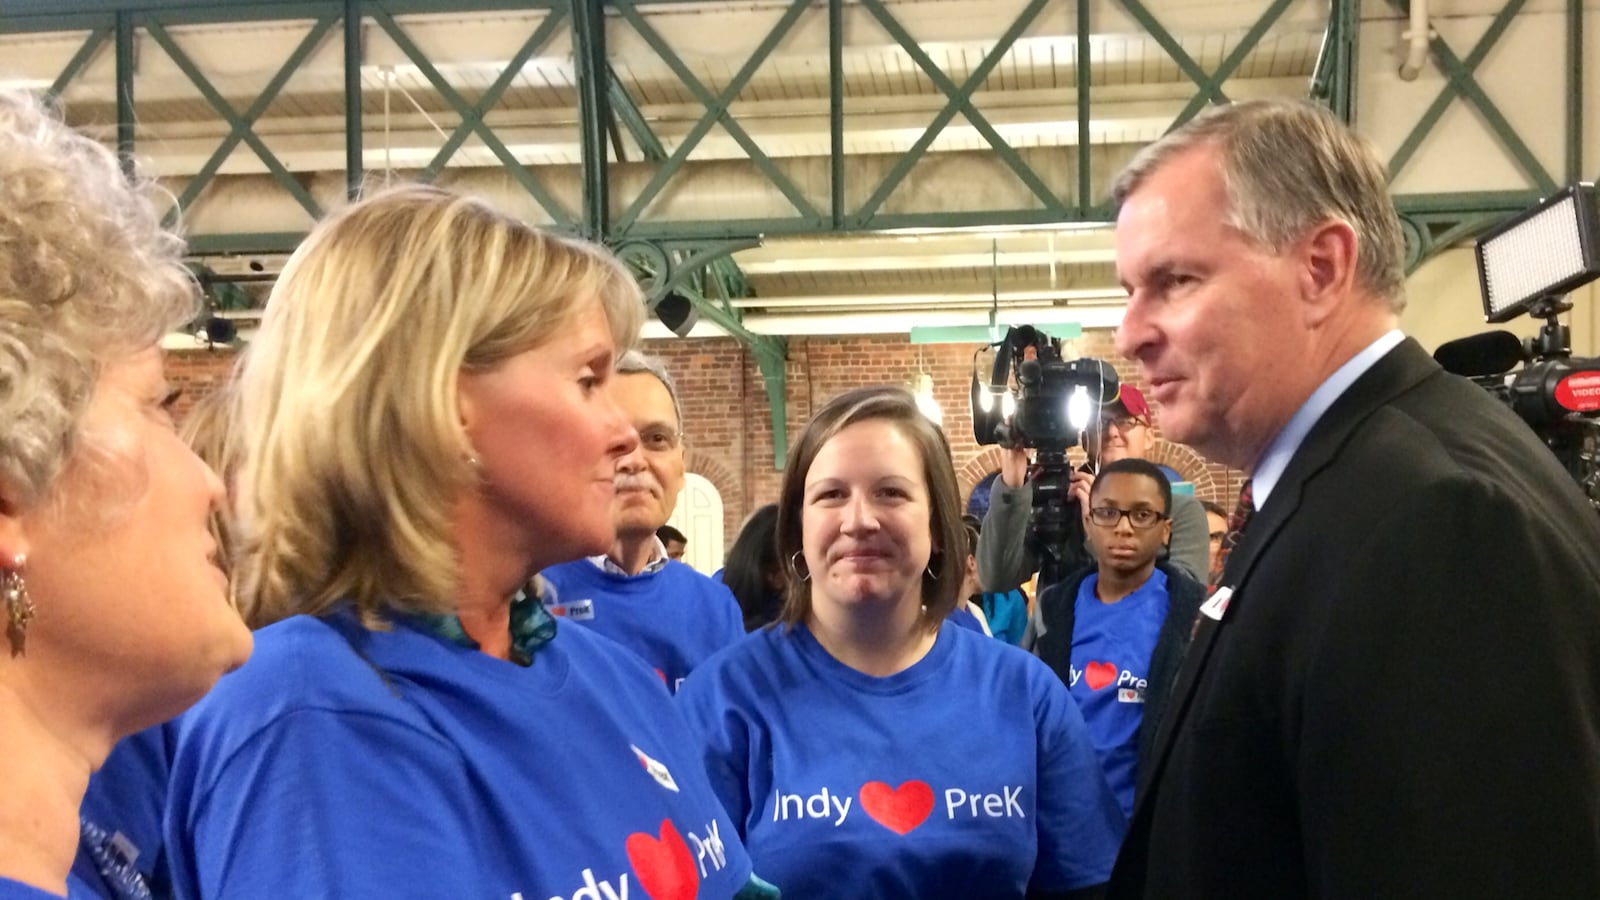 Indianapolis Mayor Greg Ballard speaks to supporters at a rally Dec. 1 for the Indianapolis Preschool Plan.